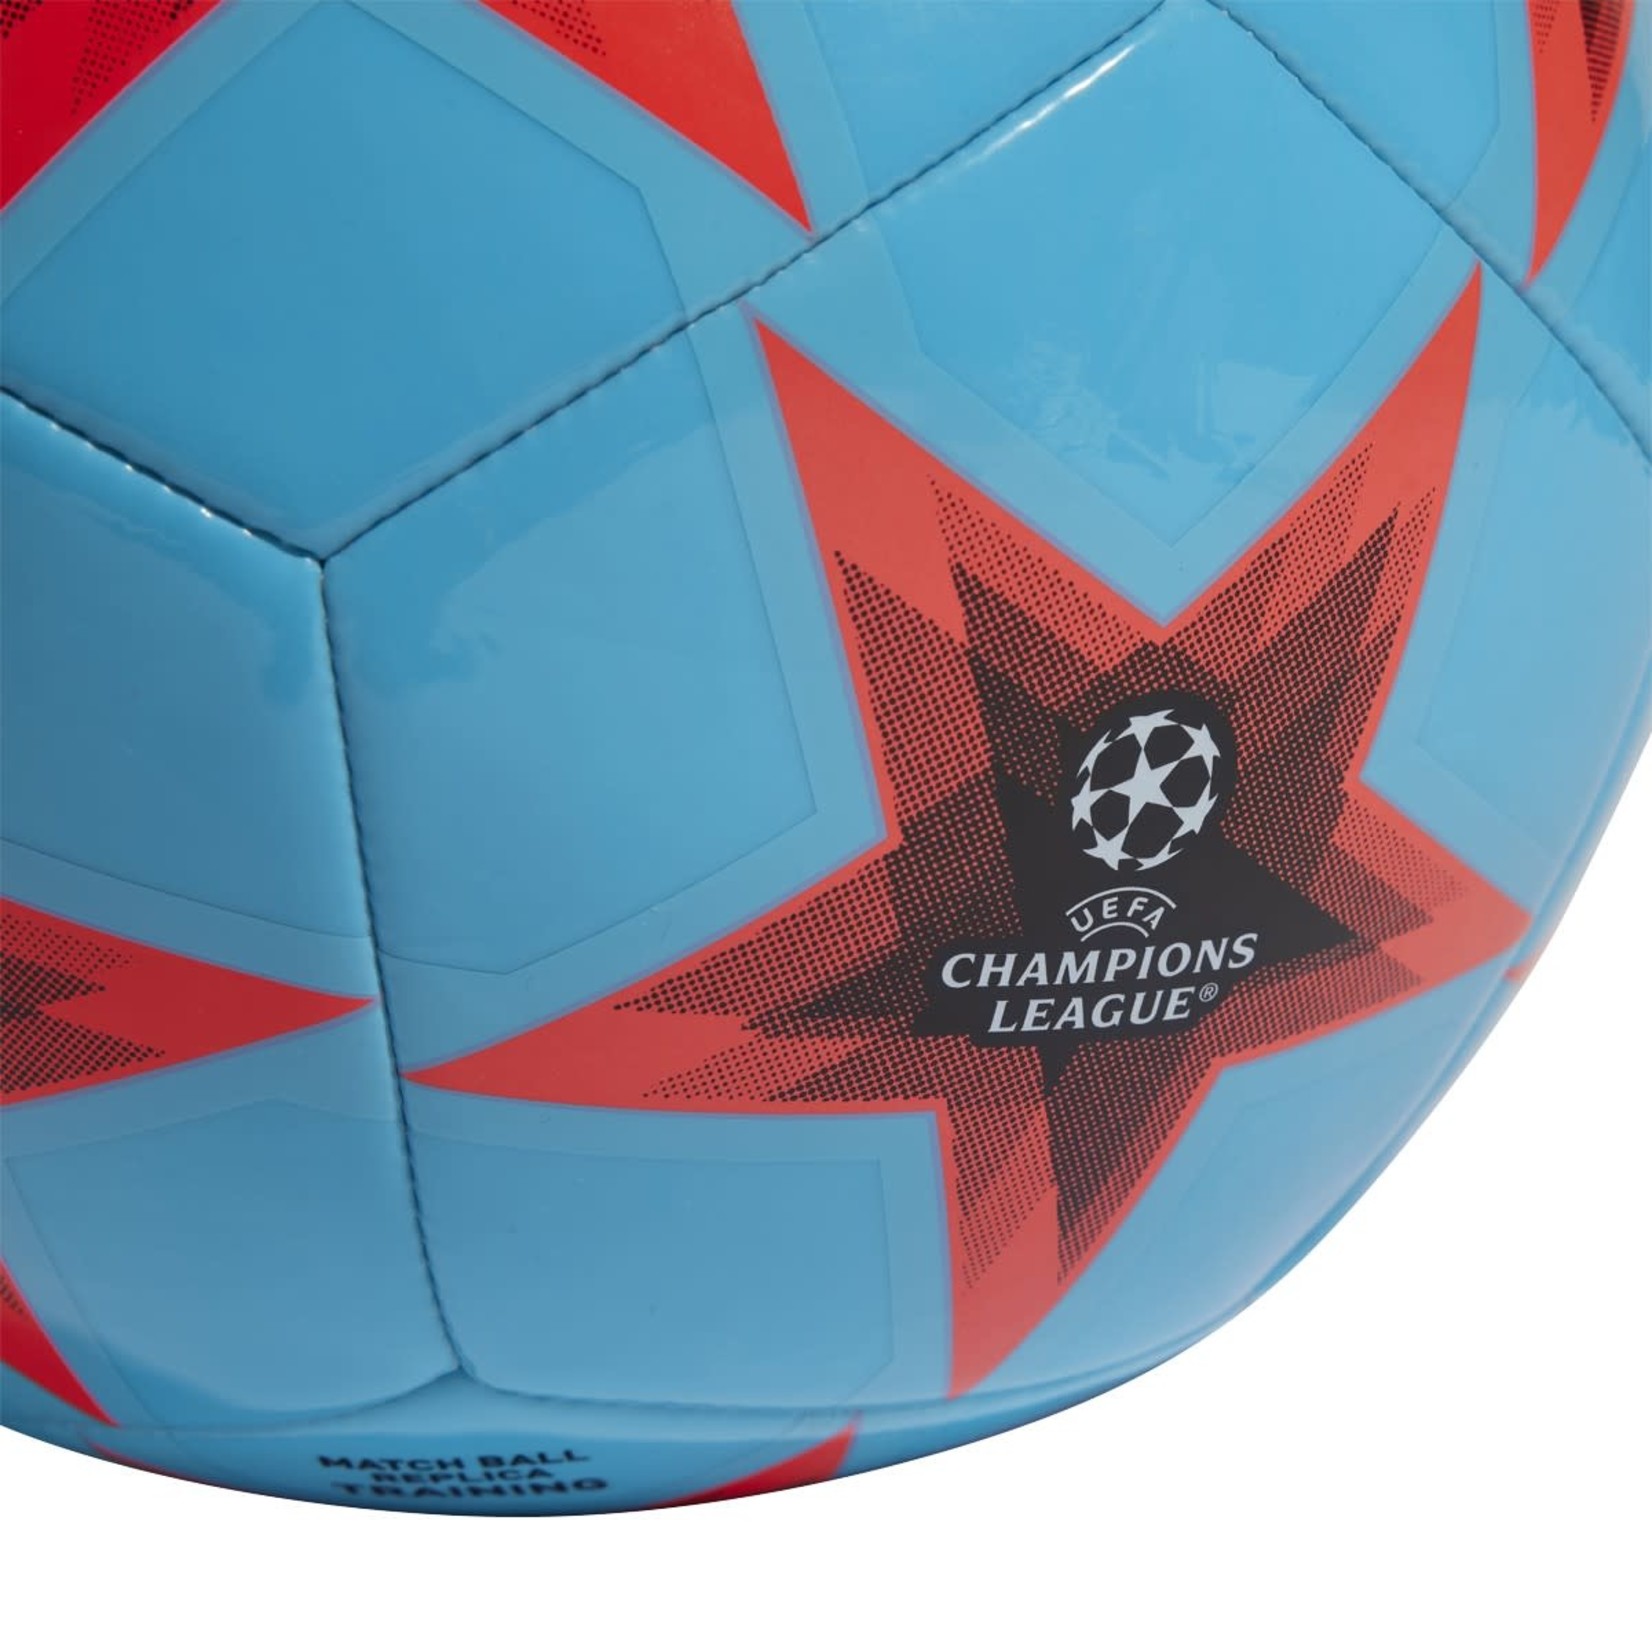 ADIDAS UCL 22/23 CLUB VOID BALL (BLUE/RED)